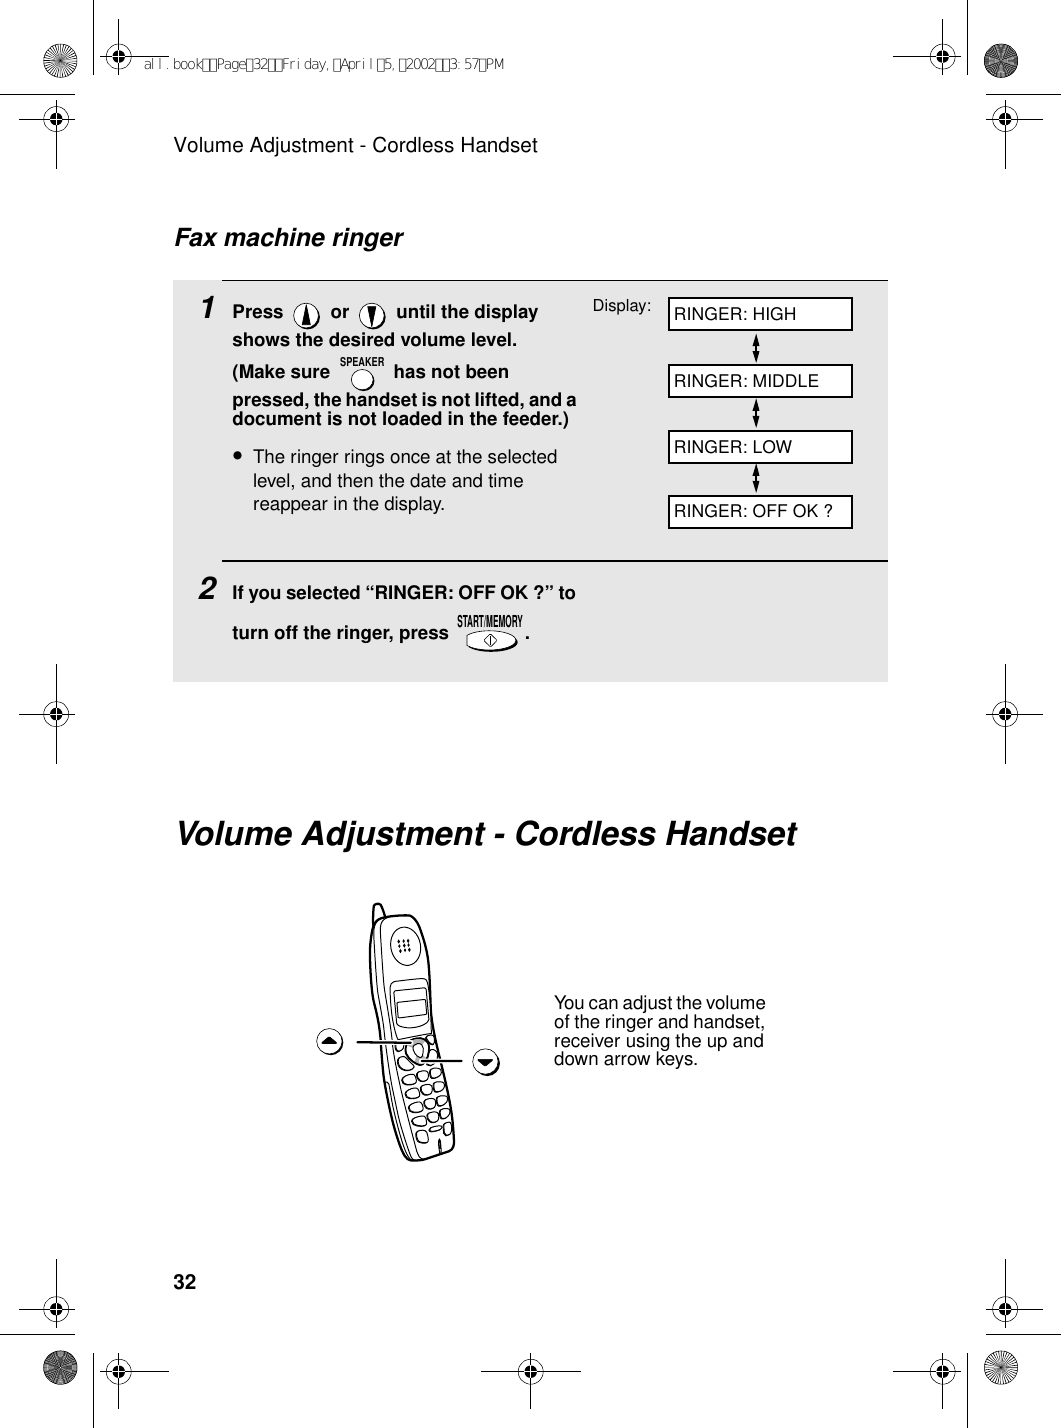 Volume Adjustment - Cordless Handset321Press   or   until the display shows the desired volume level. (Make sure   has not been pressed, the handset is not lifted, and a document is not loaded in the feeder.)•The ringer rings once at the selected level, and then the date and time reappear in the display.2If you selected “RINGER: OFF OK ?” to turn off the ringer, press  .SPEAKERSTART/MEMORYFax machine ringerDisplay: RINGER: HIGHRINGER: MIDDLERINGER: LOWRINGER: OFF OK ?Volume Adjustment - Cordless HandsetYou can adjust the volume of the ringer and handset, receiver using the up and down arrow keys.all.bookPage32Friday,April5,20023:57PM